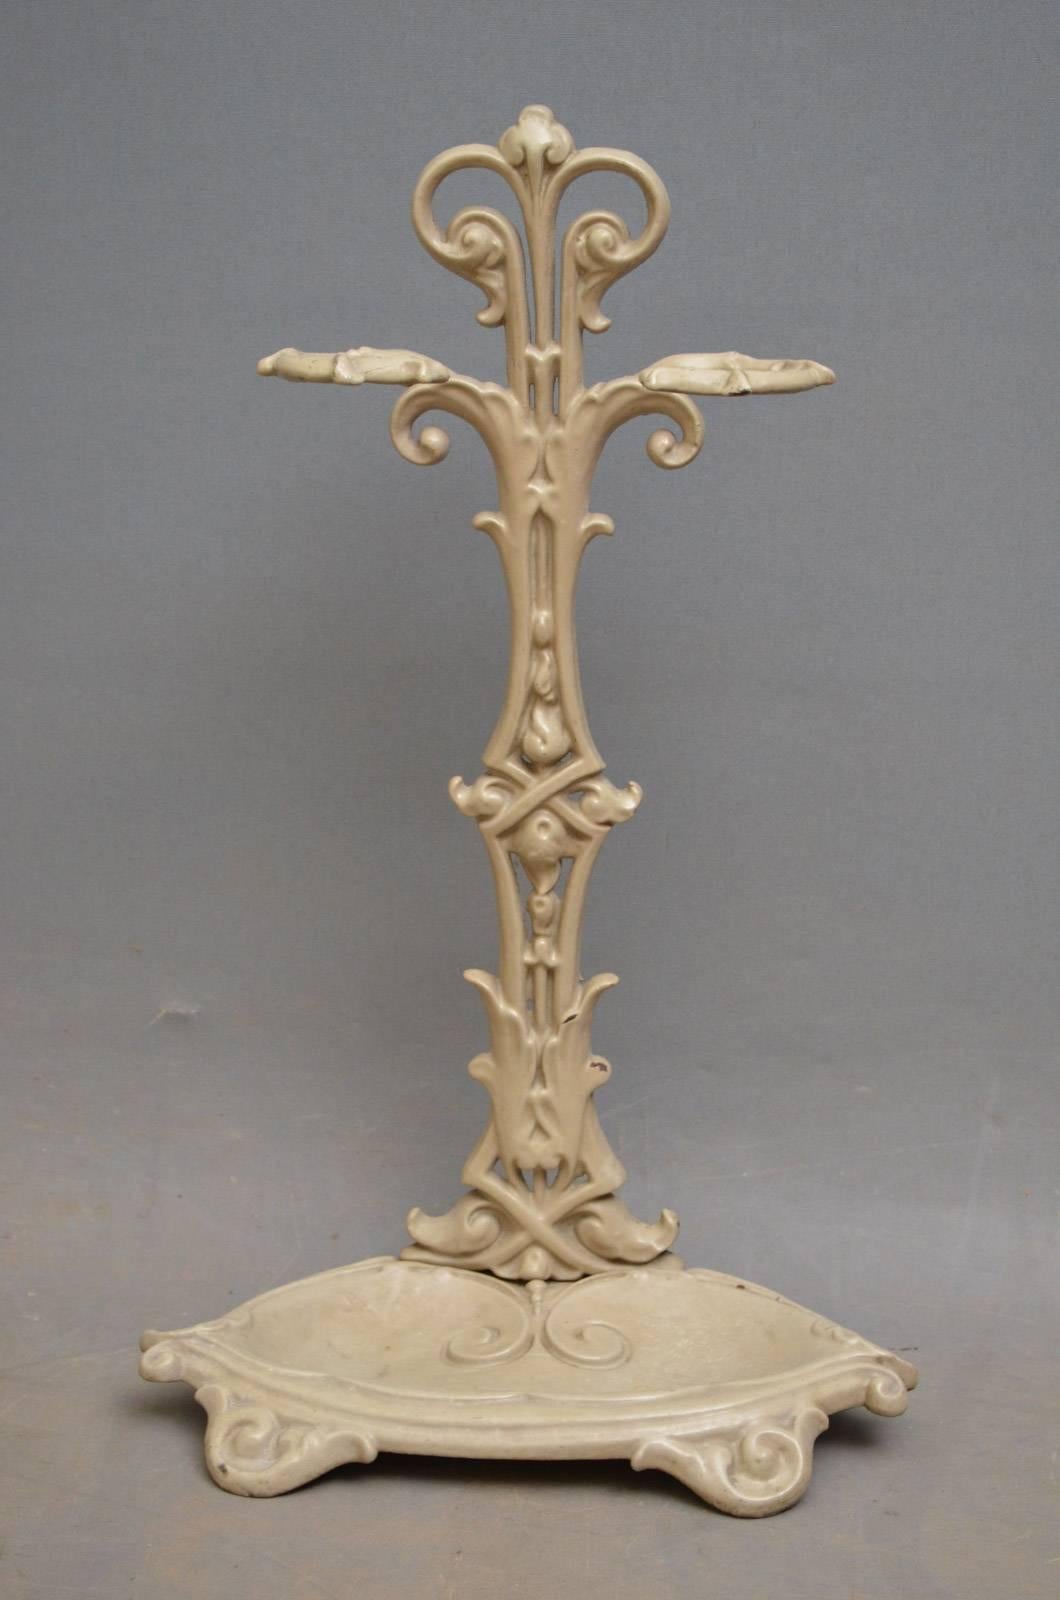 K0293 French Art Nouveau umbrella stand of flowing organic form. This antique hall stand retains original mushroom color enamel (couple of small chips), all in wonderful condition, circa 1890
Measures: H 24.5